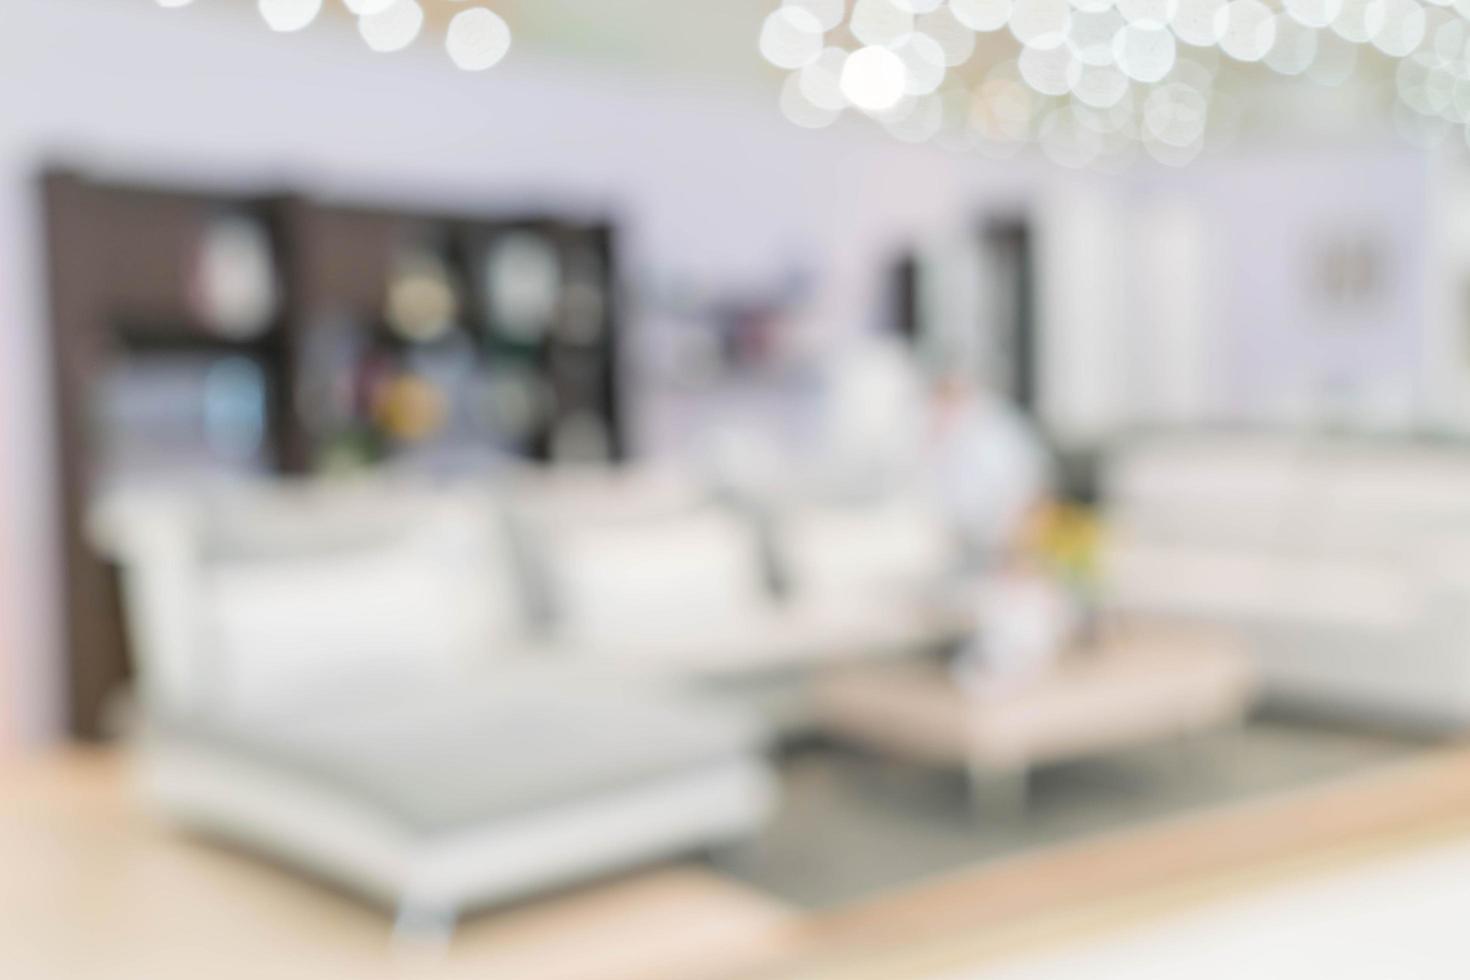 Blur image of modern living room interior for background photo